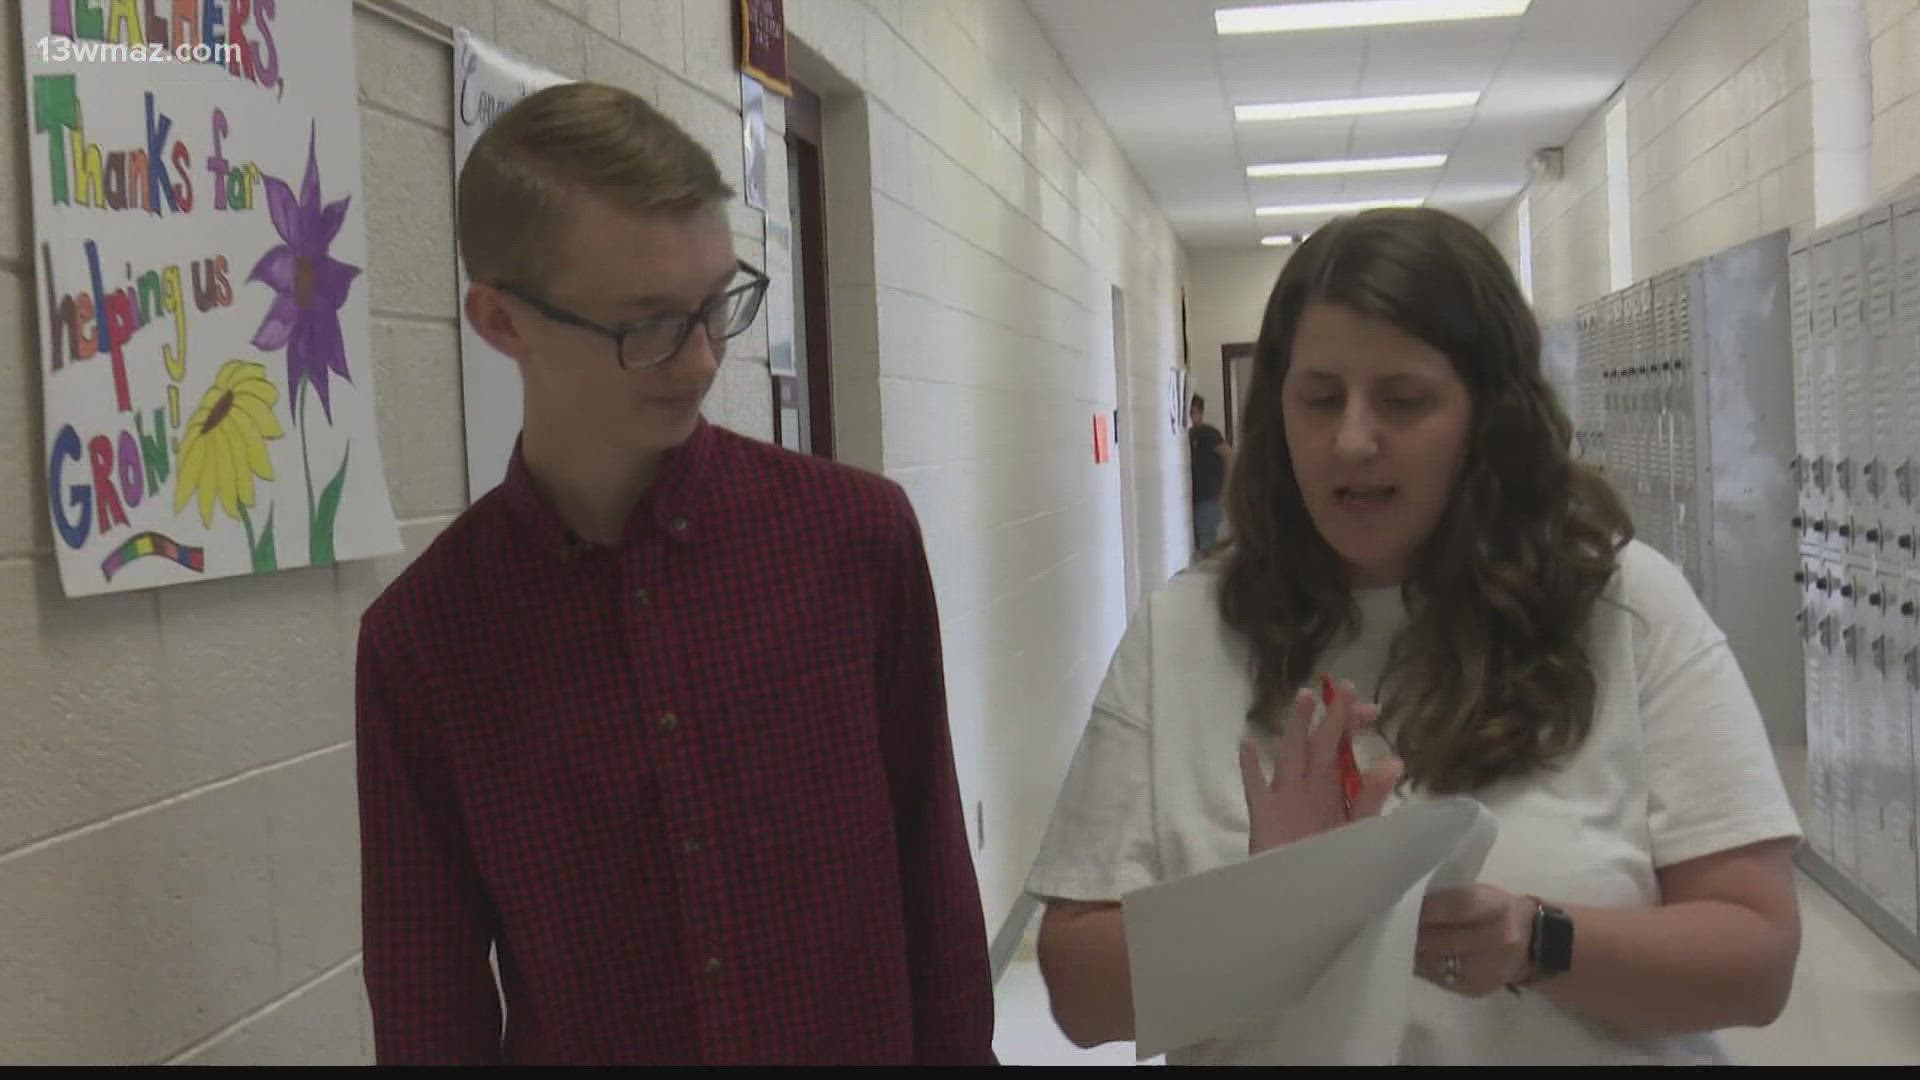 This top teacher ended her school year with a very special gift from a gifted student.